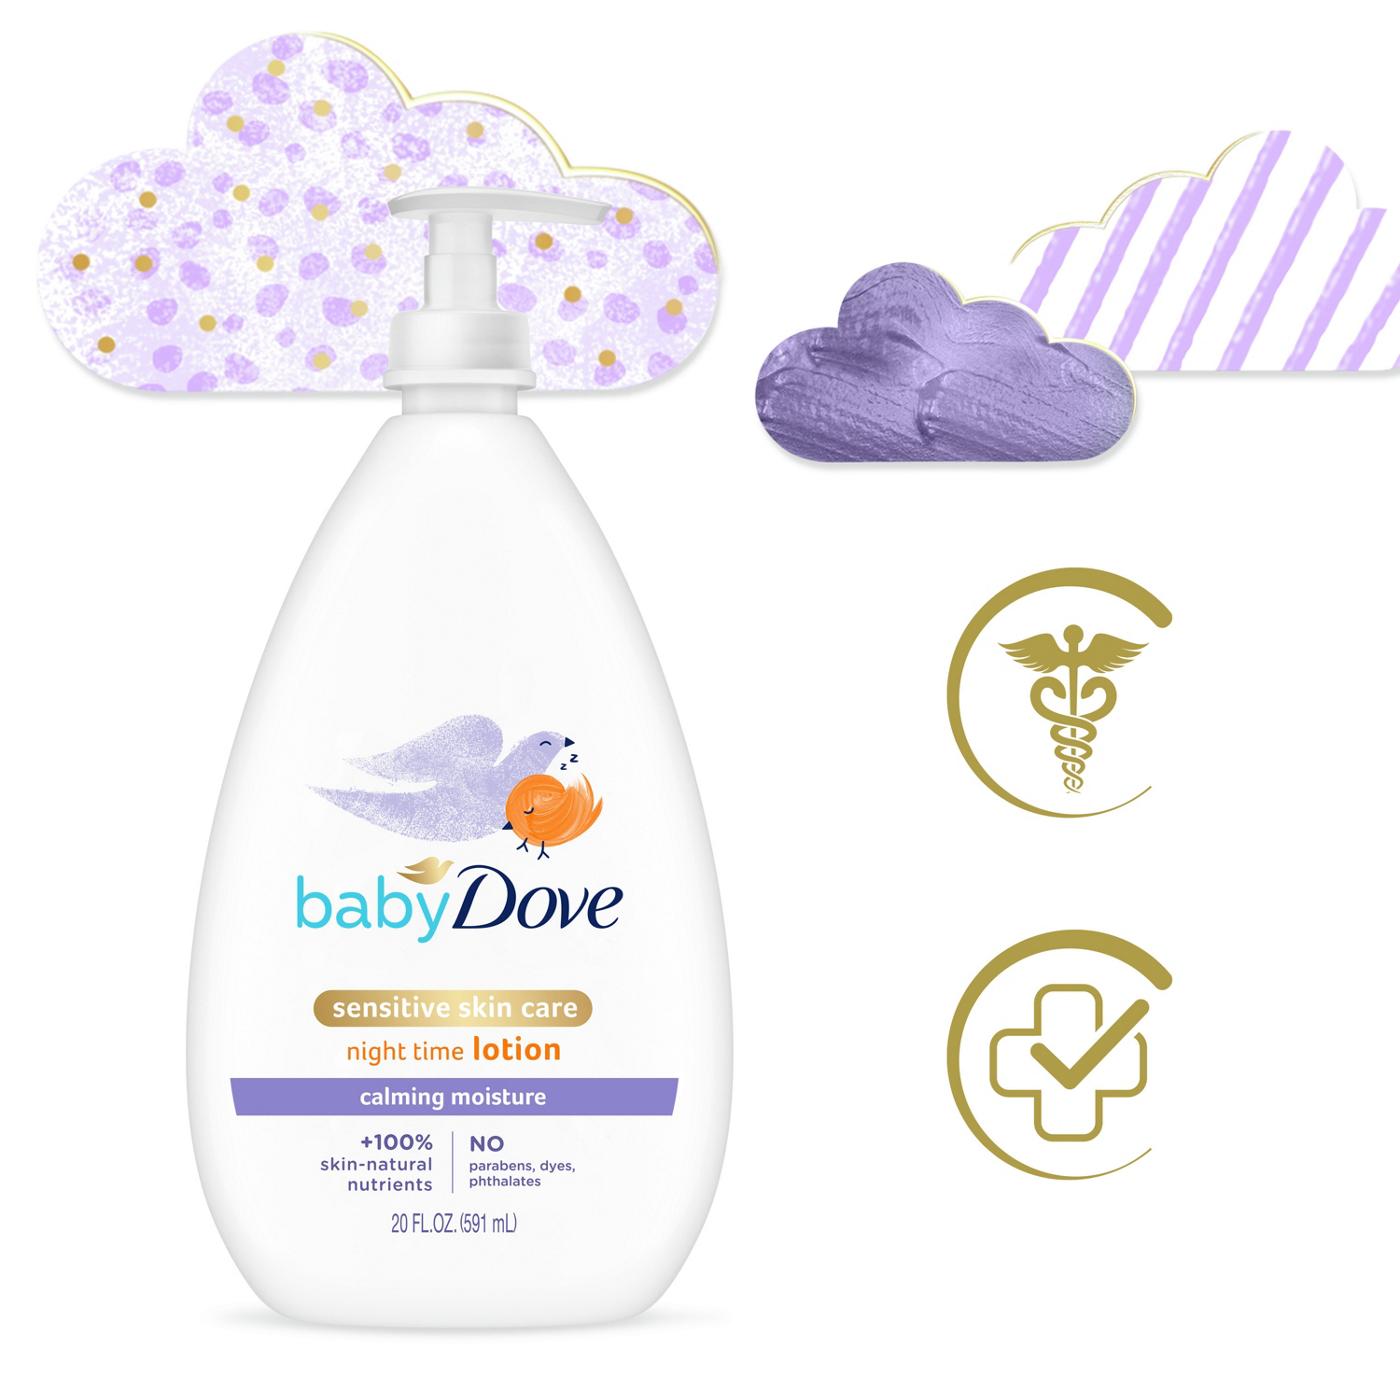 Baby Dove Calming Moisture Night Time Lotion; image 7 of 7